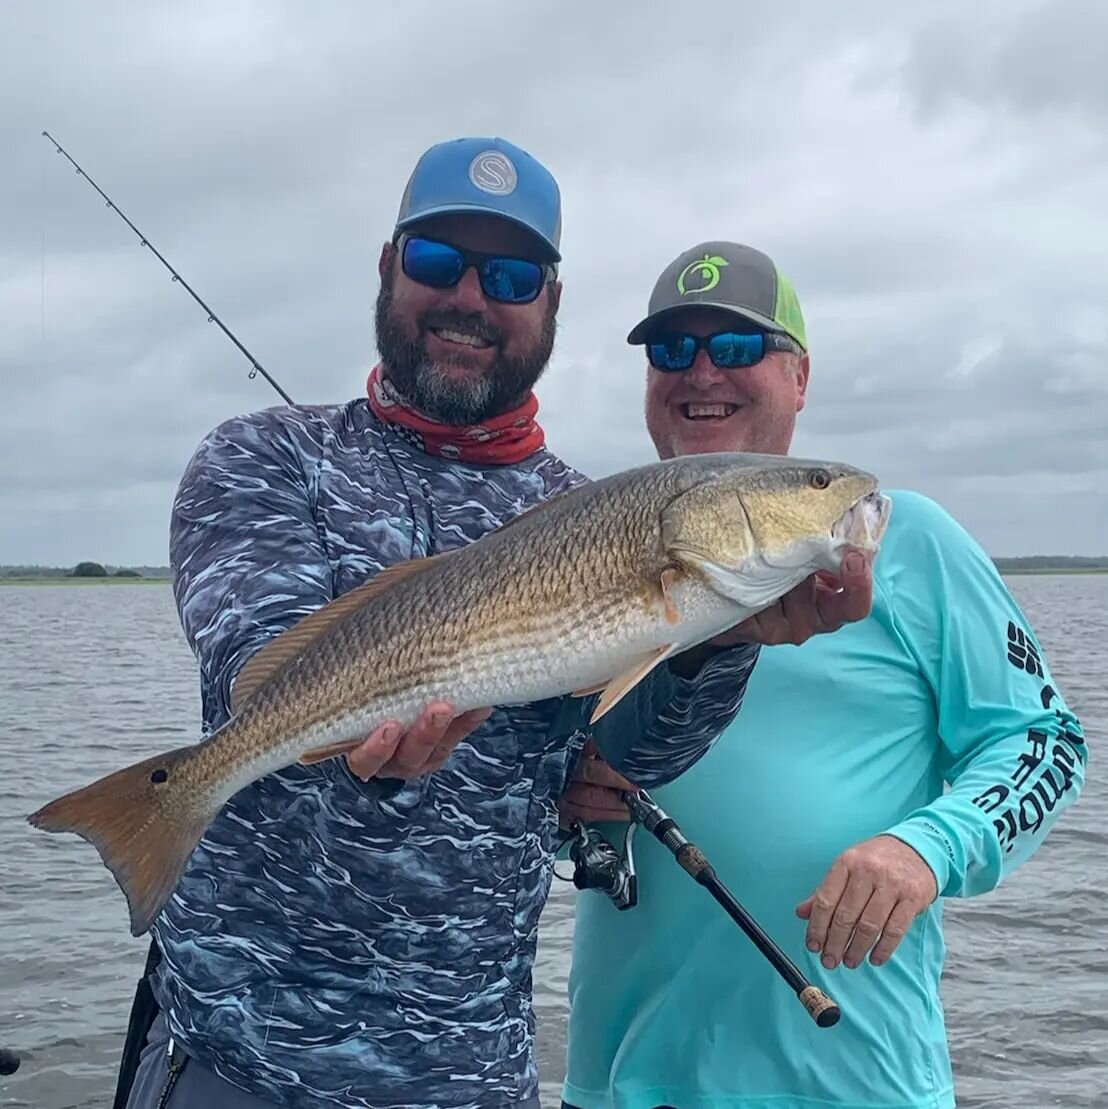 Me and my buddy/ motor builder Mark Scurry had our way with the redfish boated a solid dozen then called it a day he had motors to build 😉😁